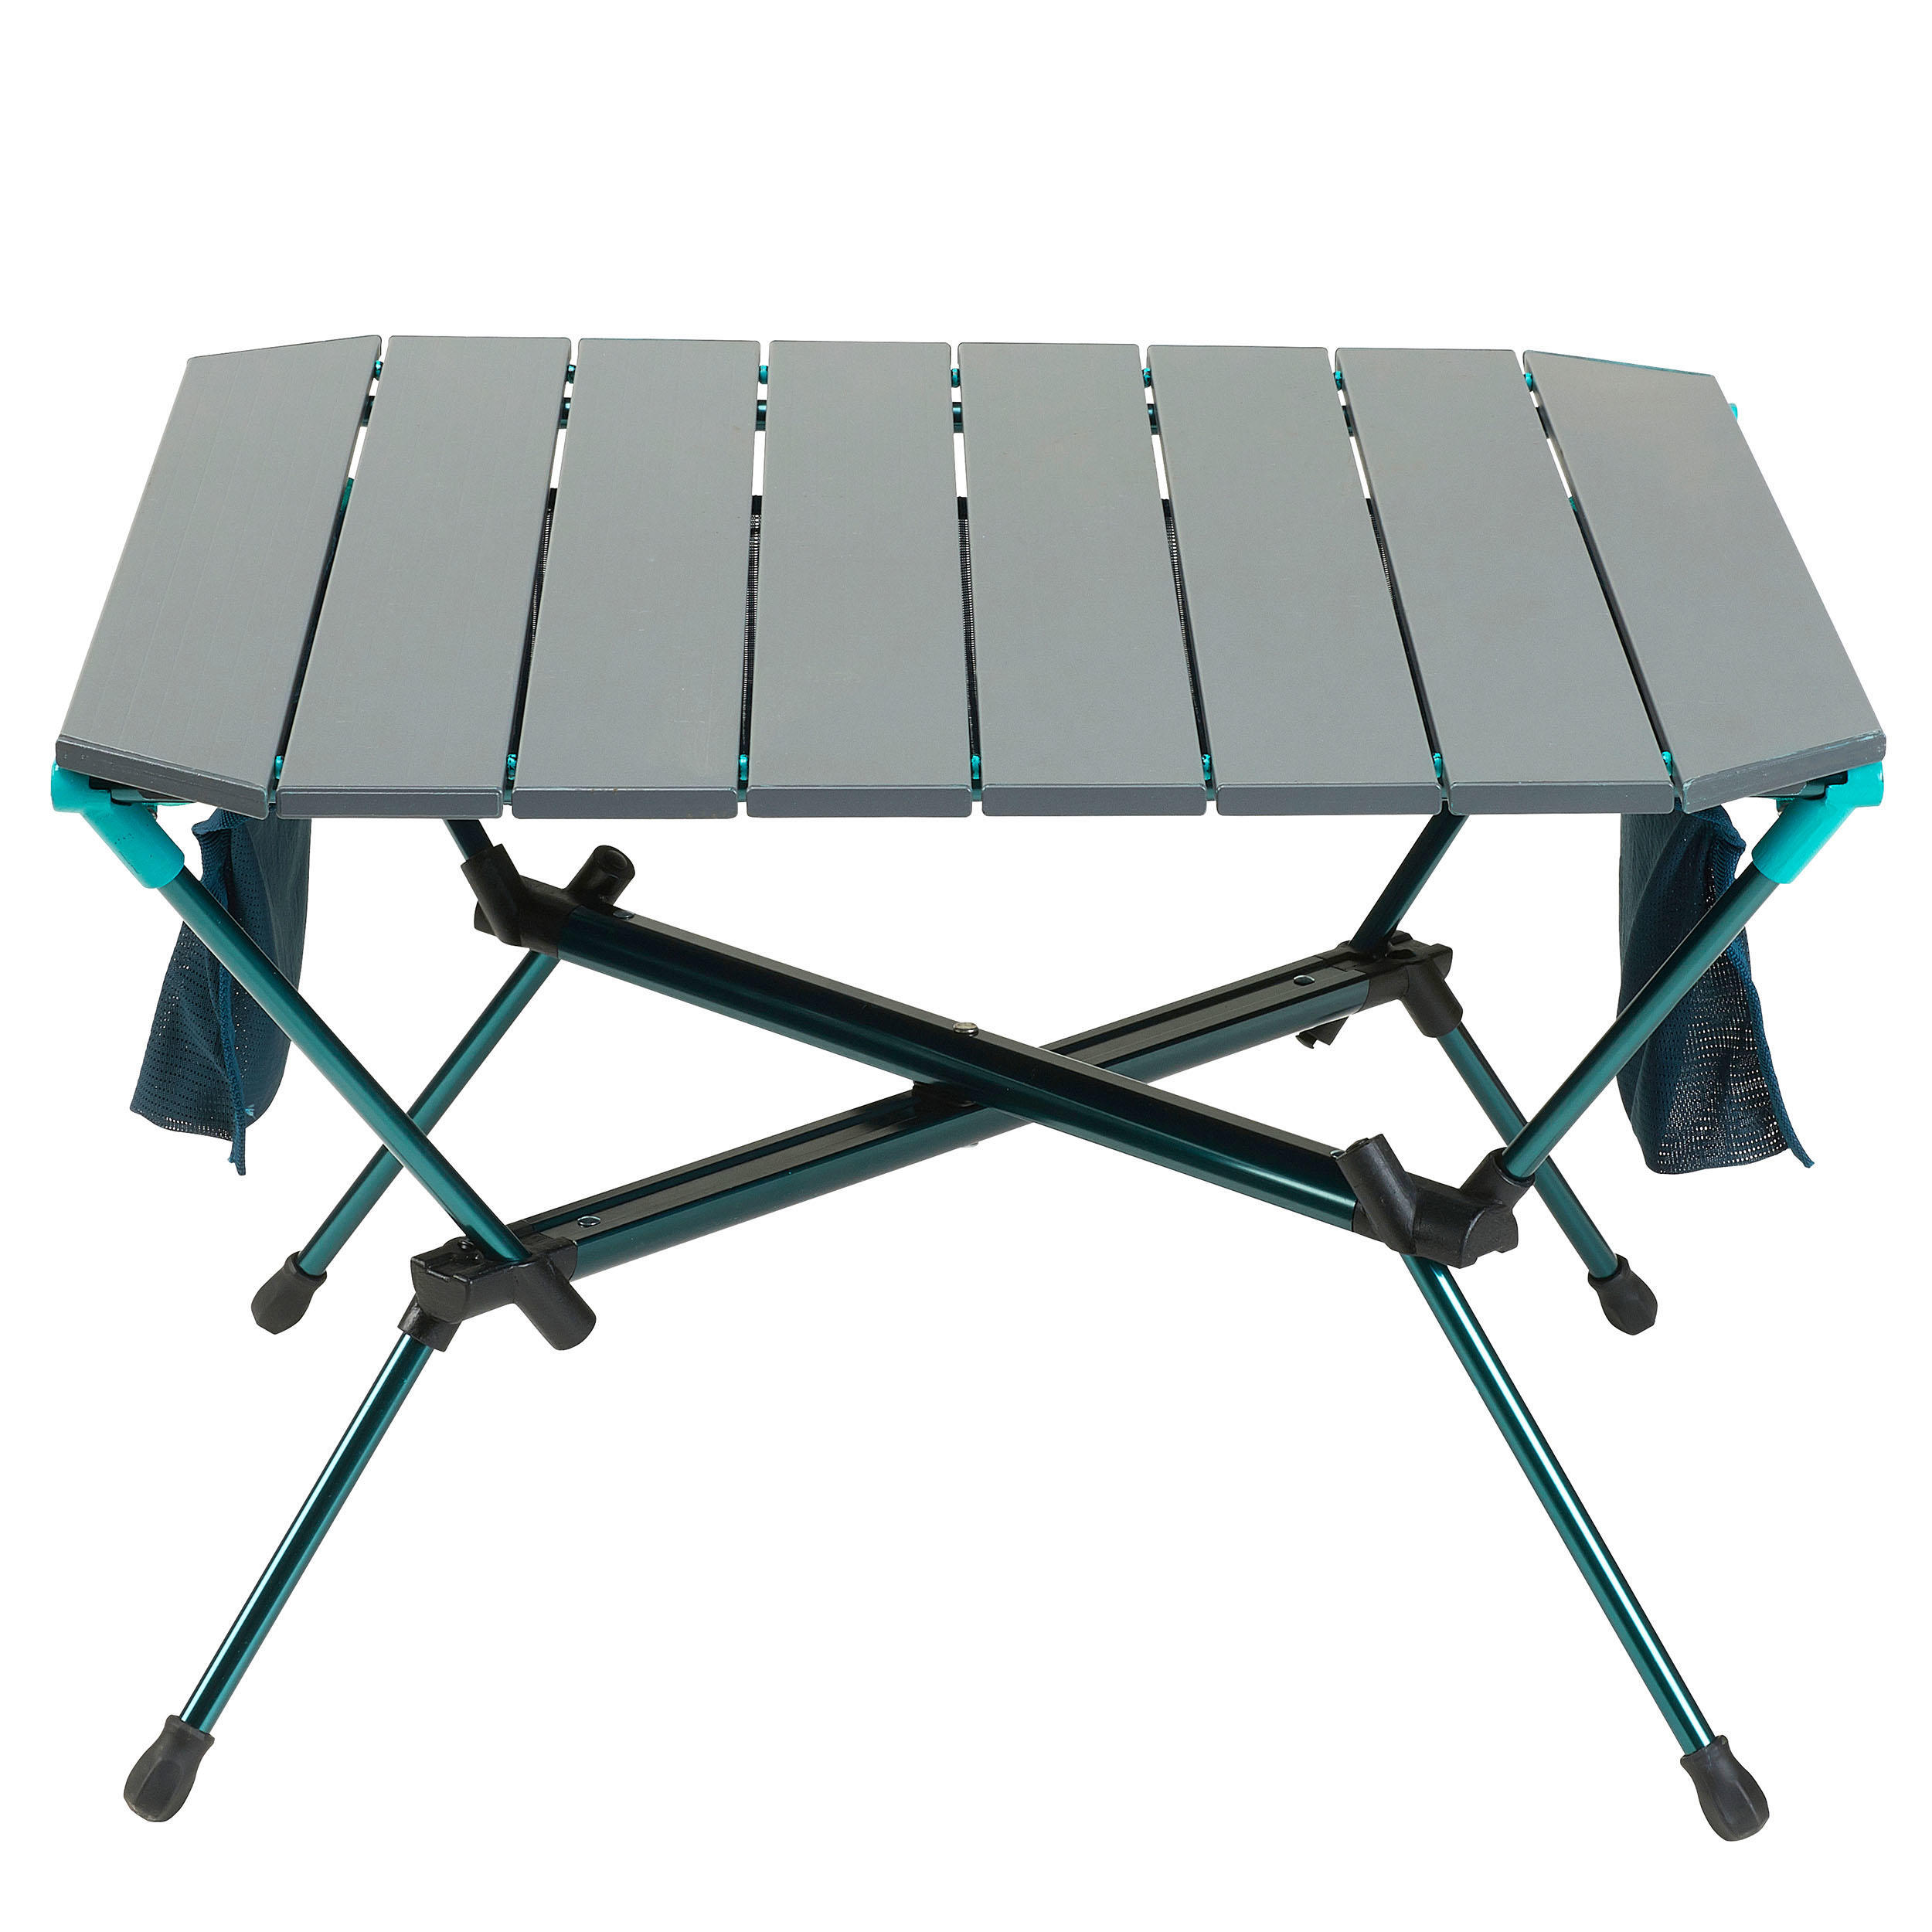 FOLDING CAMPING TABLE - MH500 6/10